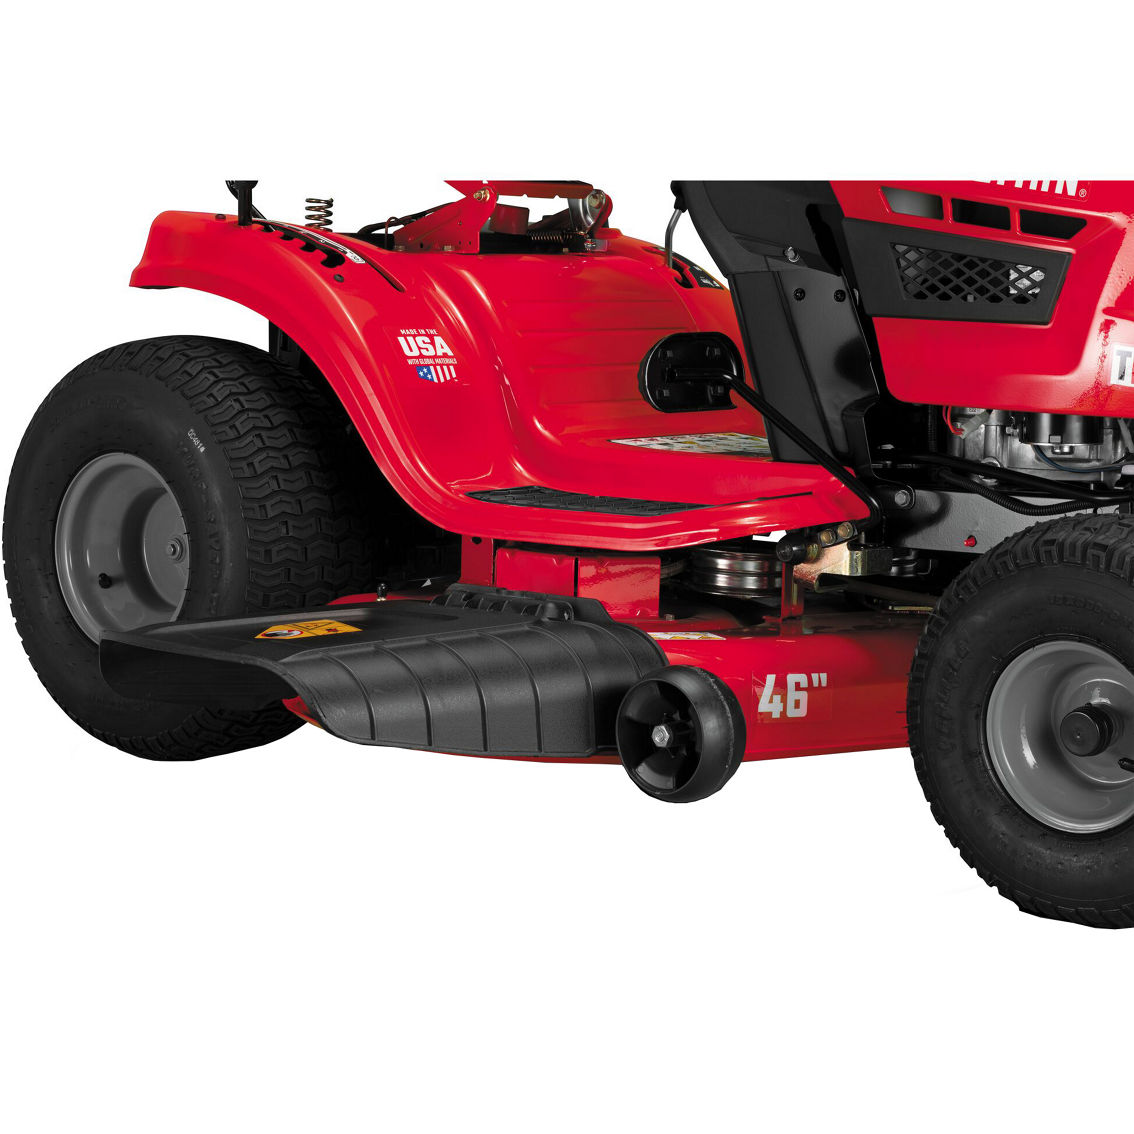 Craftsman 46 in. Tractor - Image 3 of 4